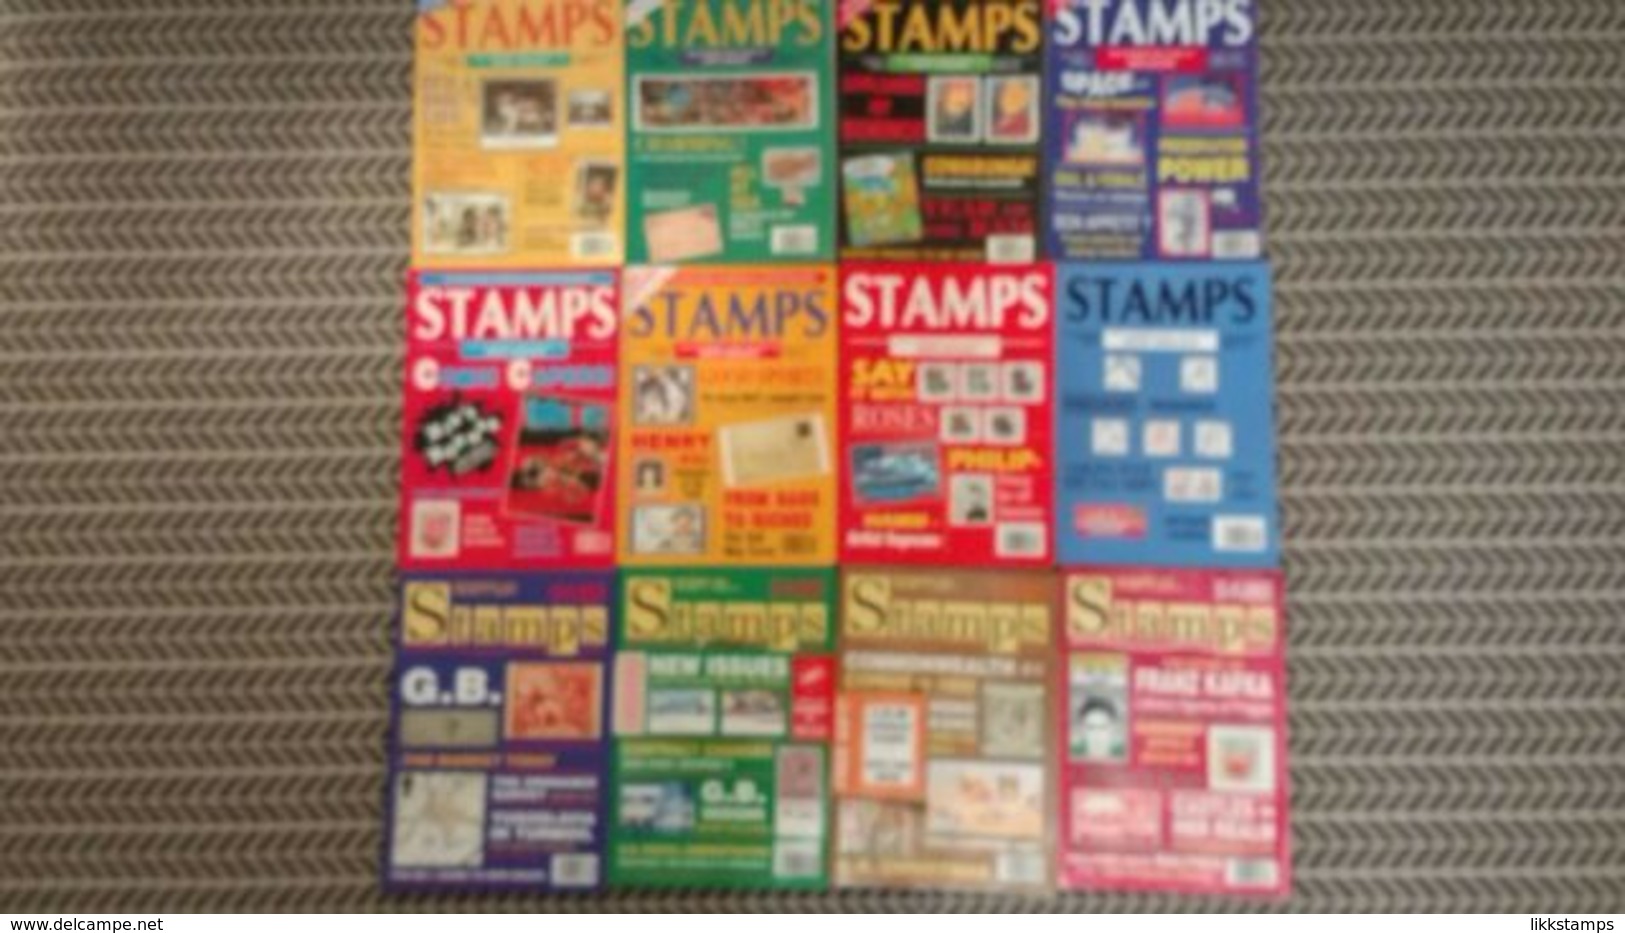 STAMPS MAGAZINE JANUARY 1991 TO DECEMBER 1991 (VOLUME 11 No. 1 TO VOLUME 11 No. 12) #L0025 - English (from 1941)